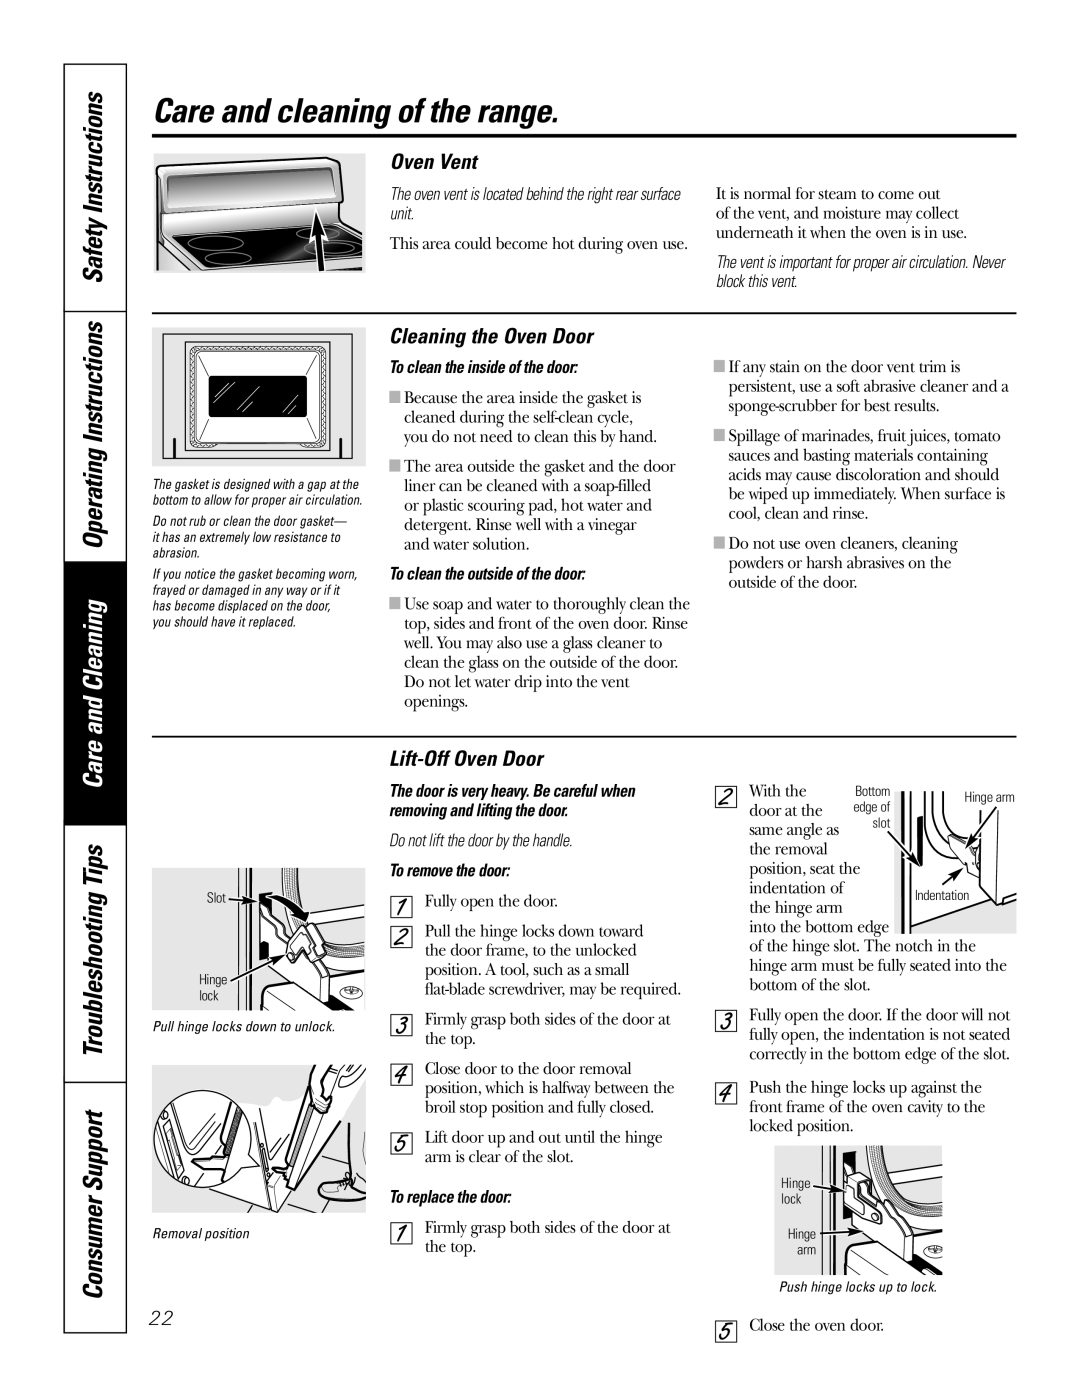 GE Monogram JBP68 and Cleaning Operating Instructions, Consumer Support Troubleshooting Tips Care, Oven Vent, Safety 